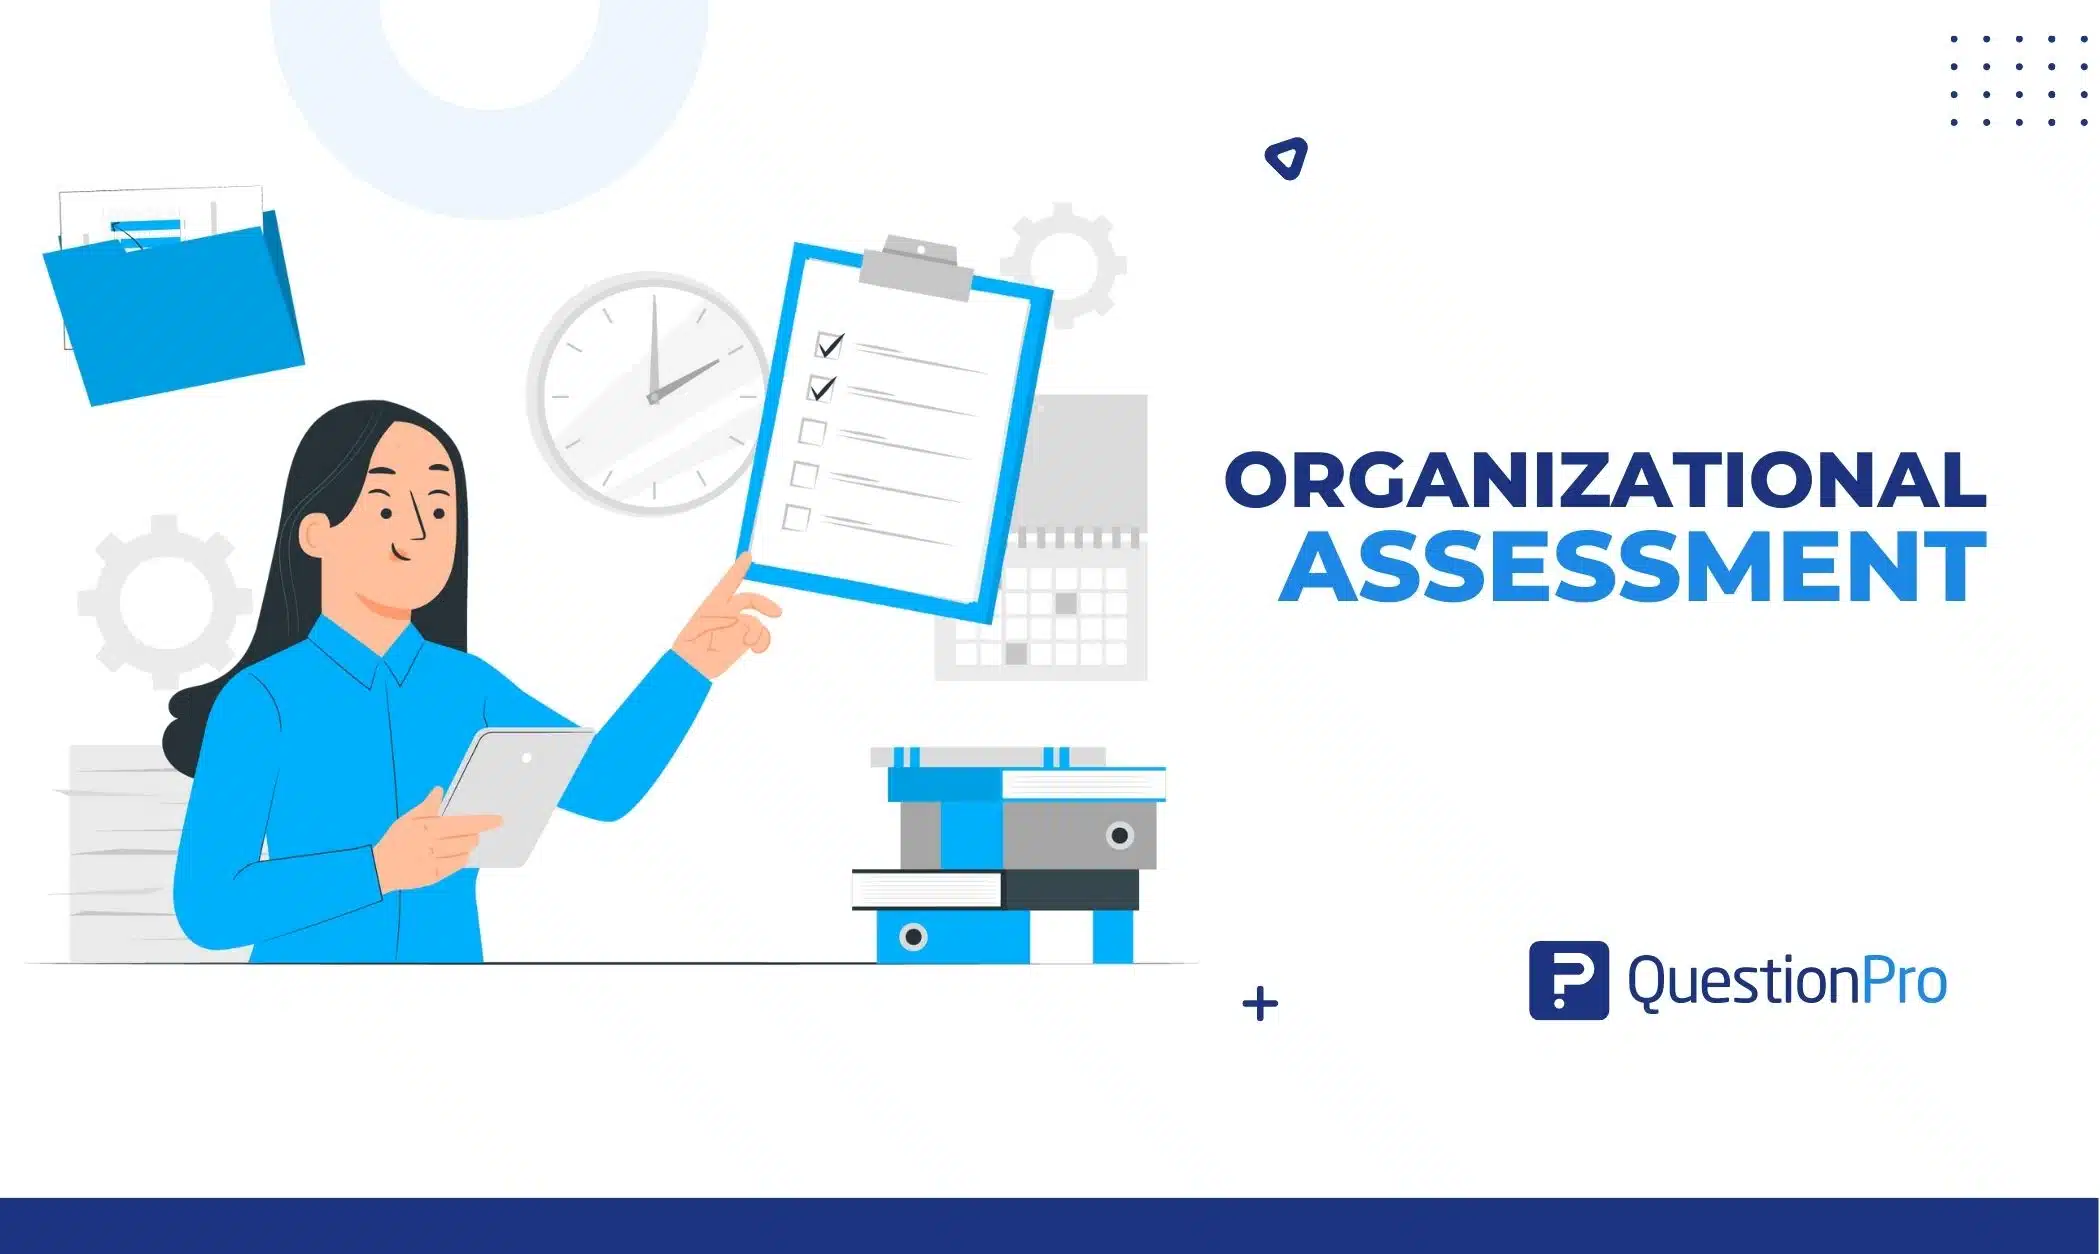 Organizational assessment examines procedures, environment, and structure. It helps businesses identify areas of opportunity. Learn more.